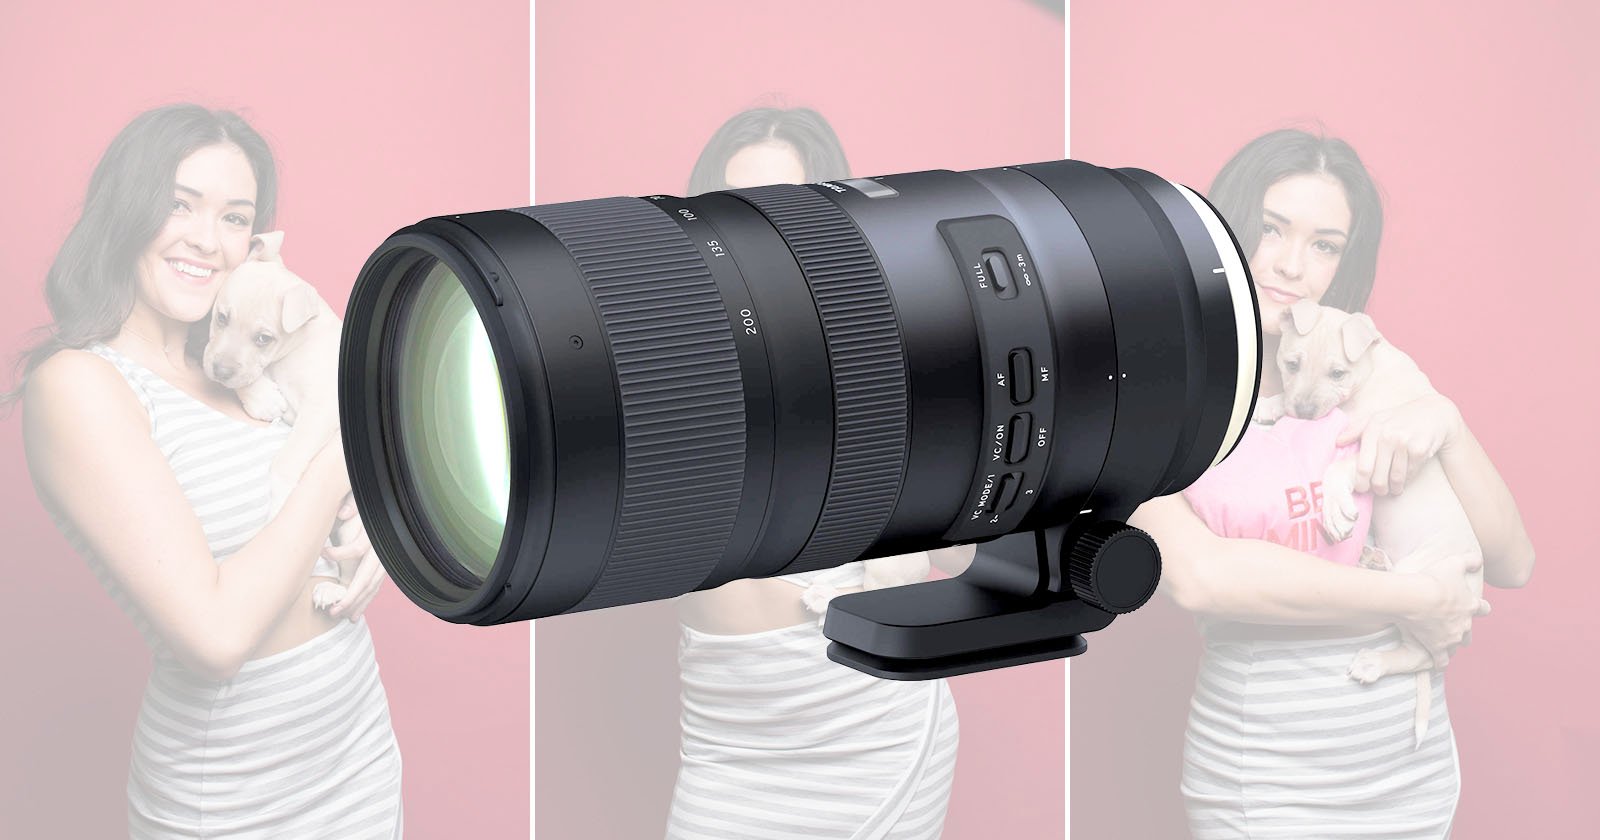 Hands On With the New Tamron 70-200mm f/2.8 G2